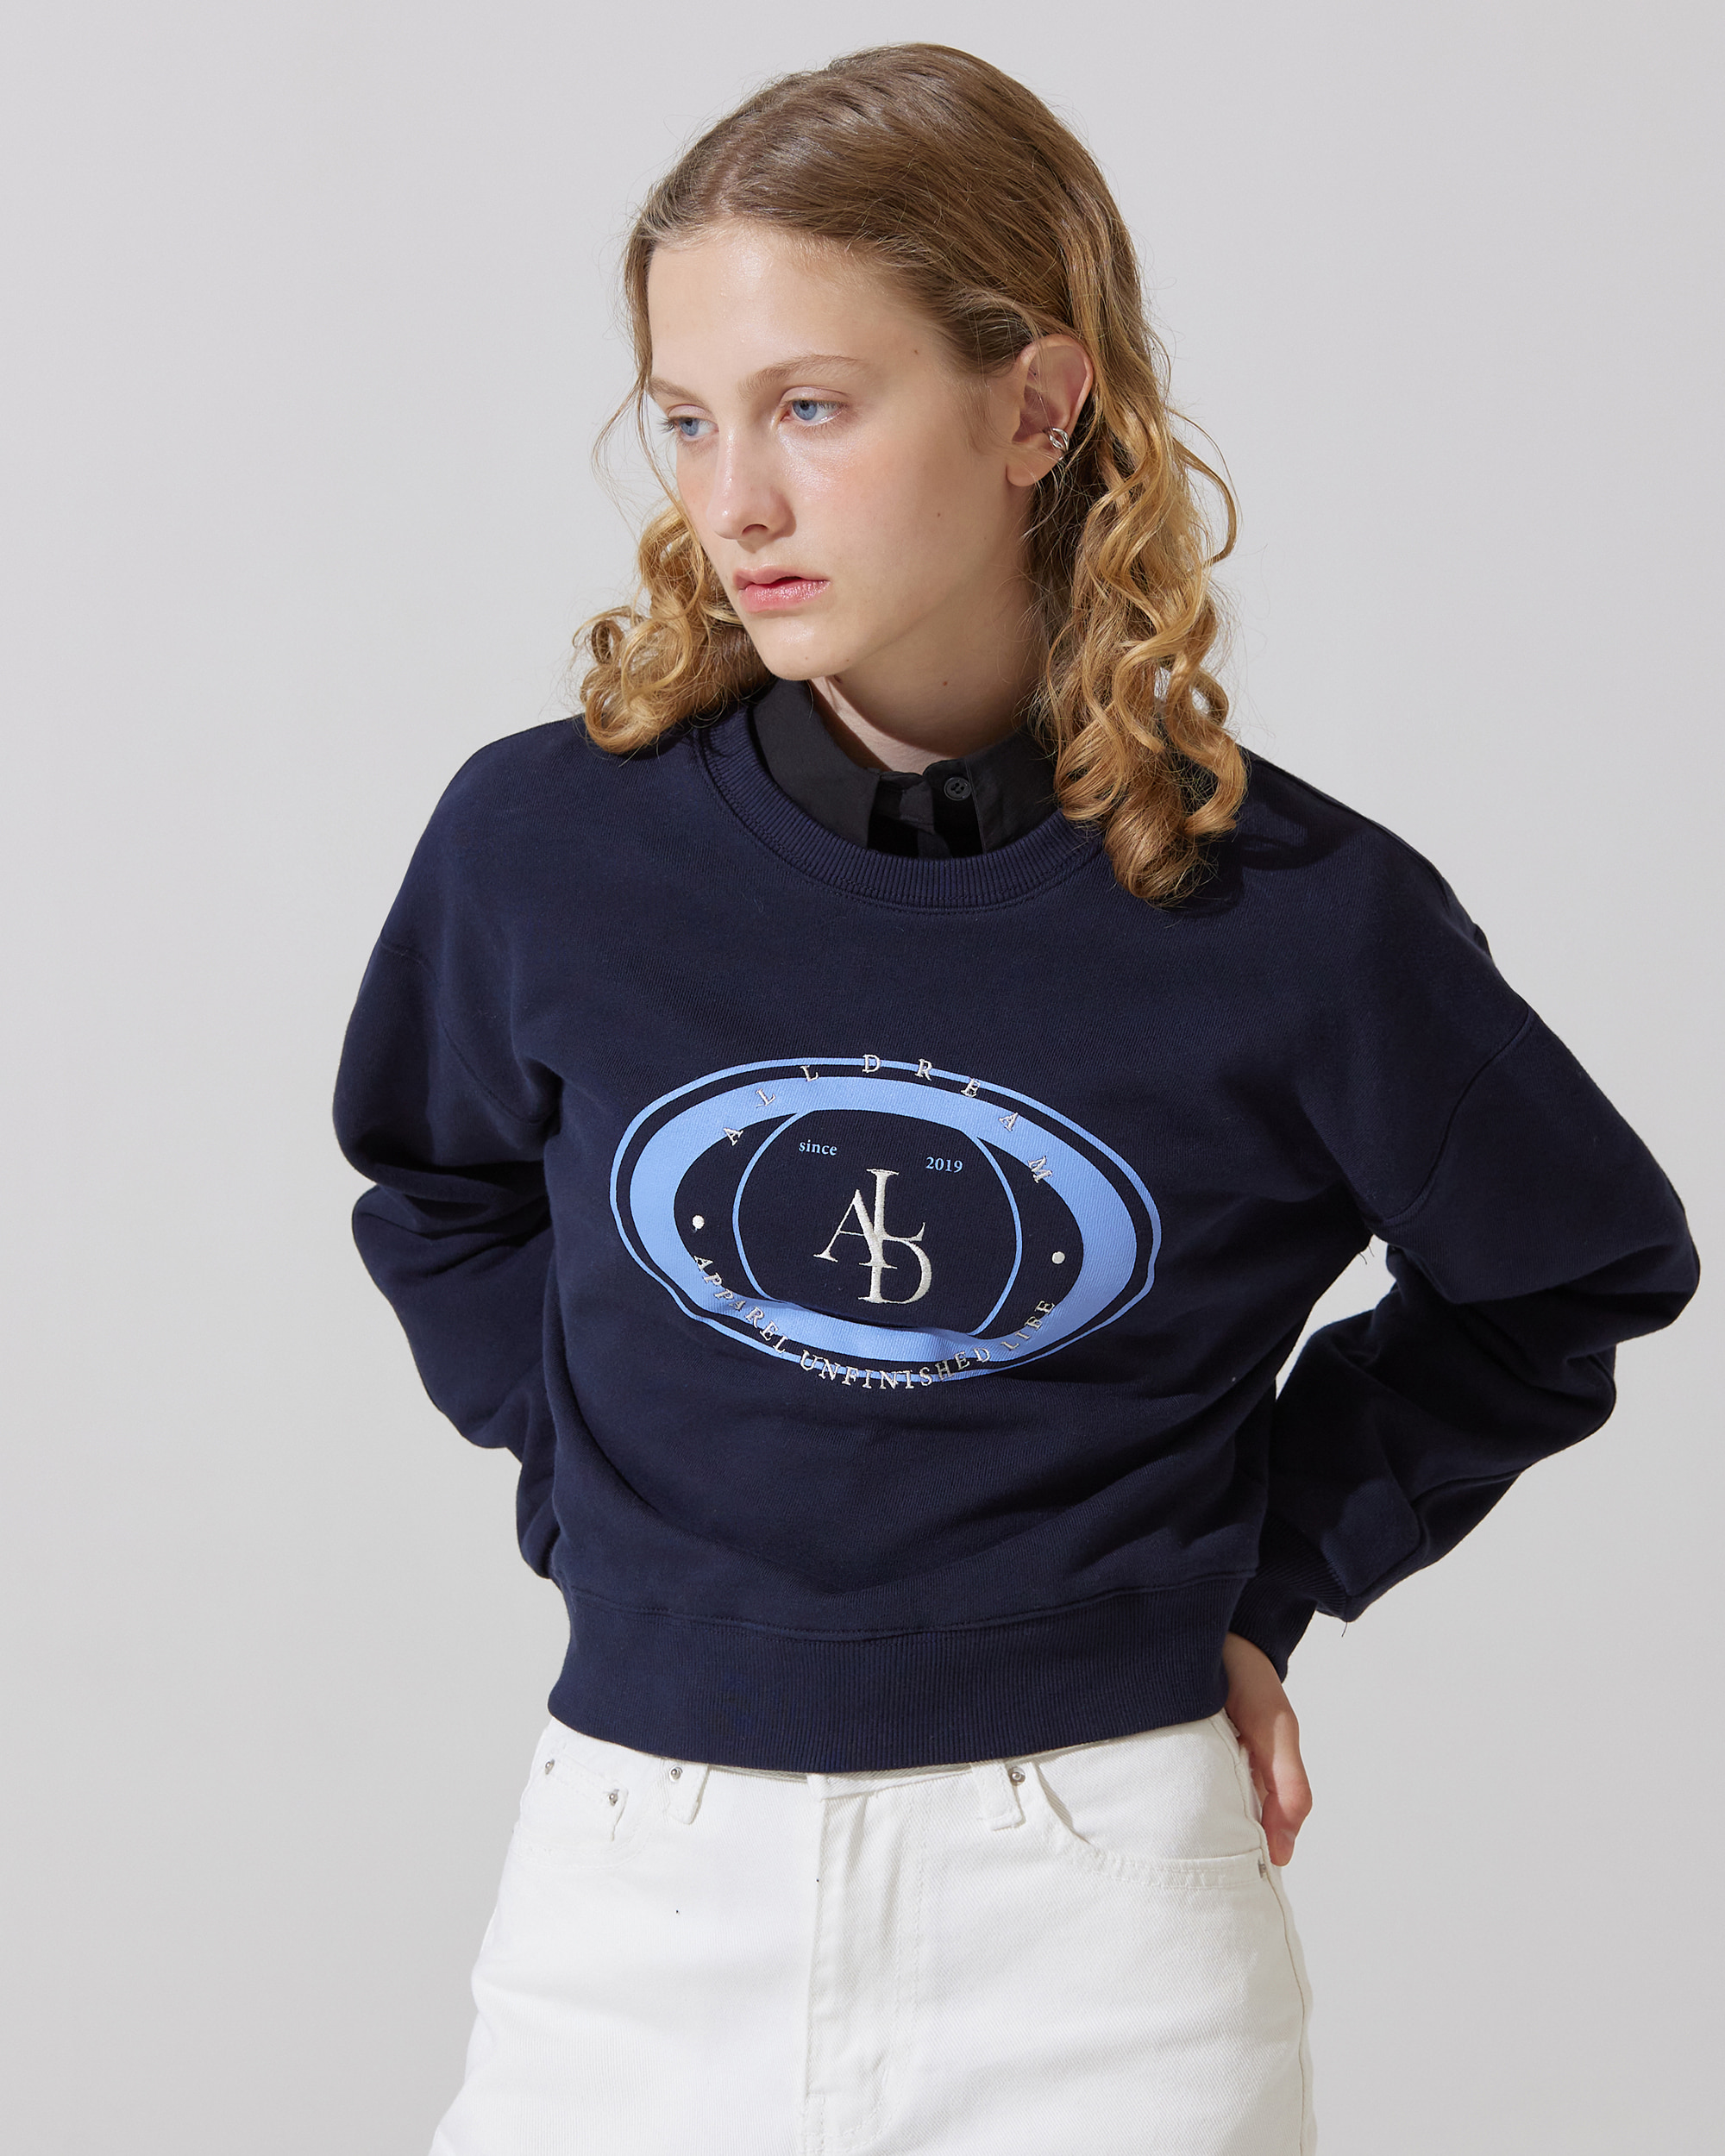 ALD space logo embroidery sweat shirts - navy